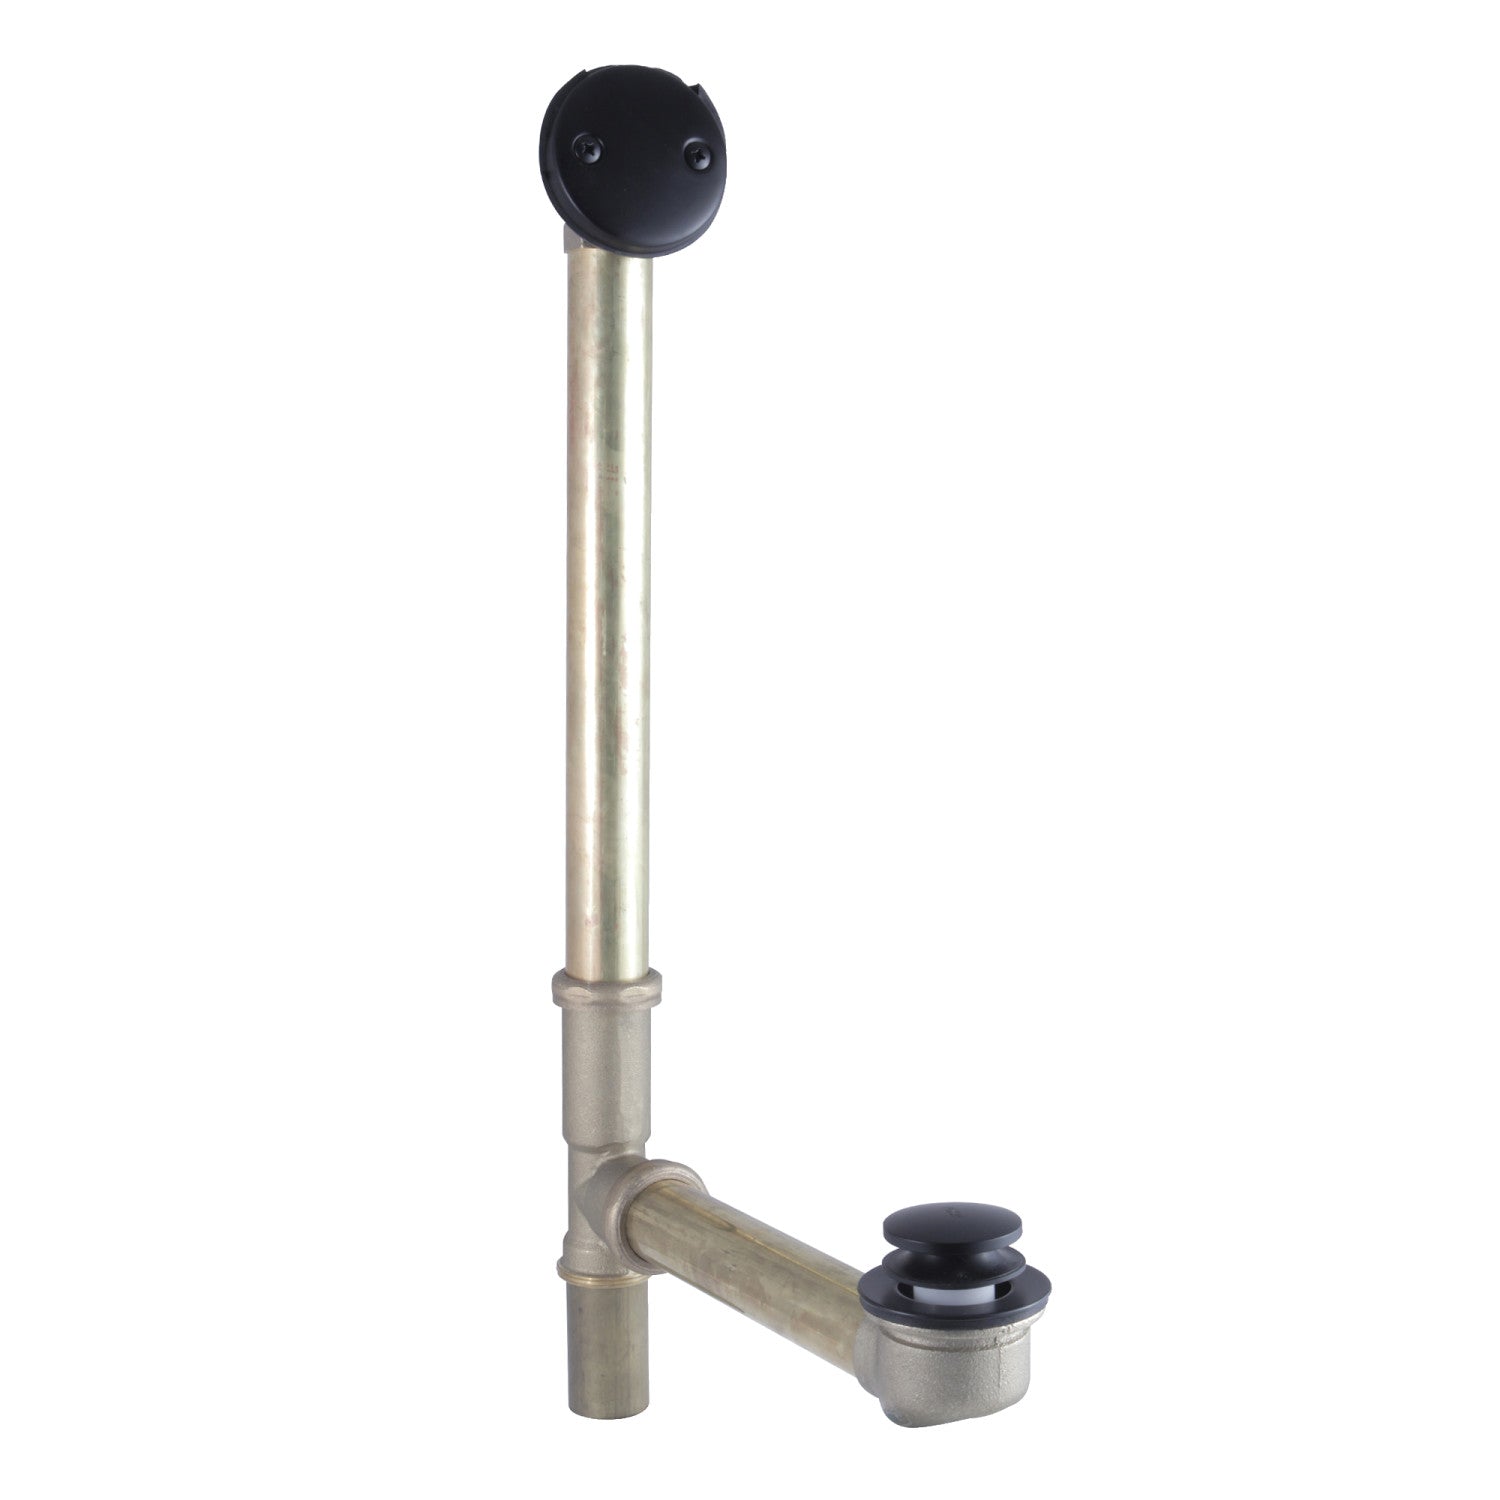 Kingston Brass Made To Match DTT2160MB 21-Inch Brass Toe Touch Tub 